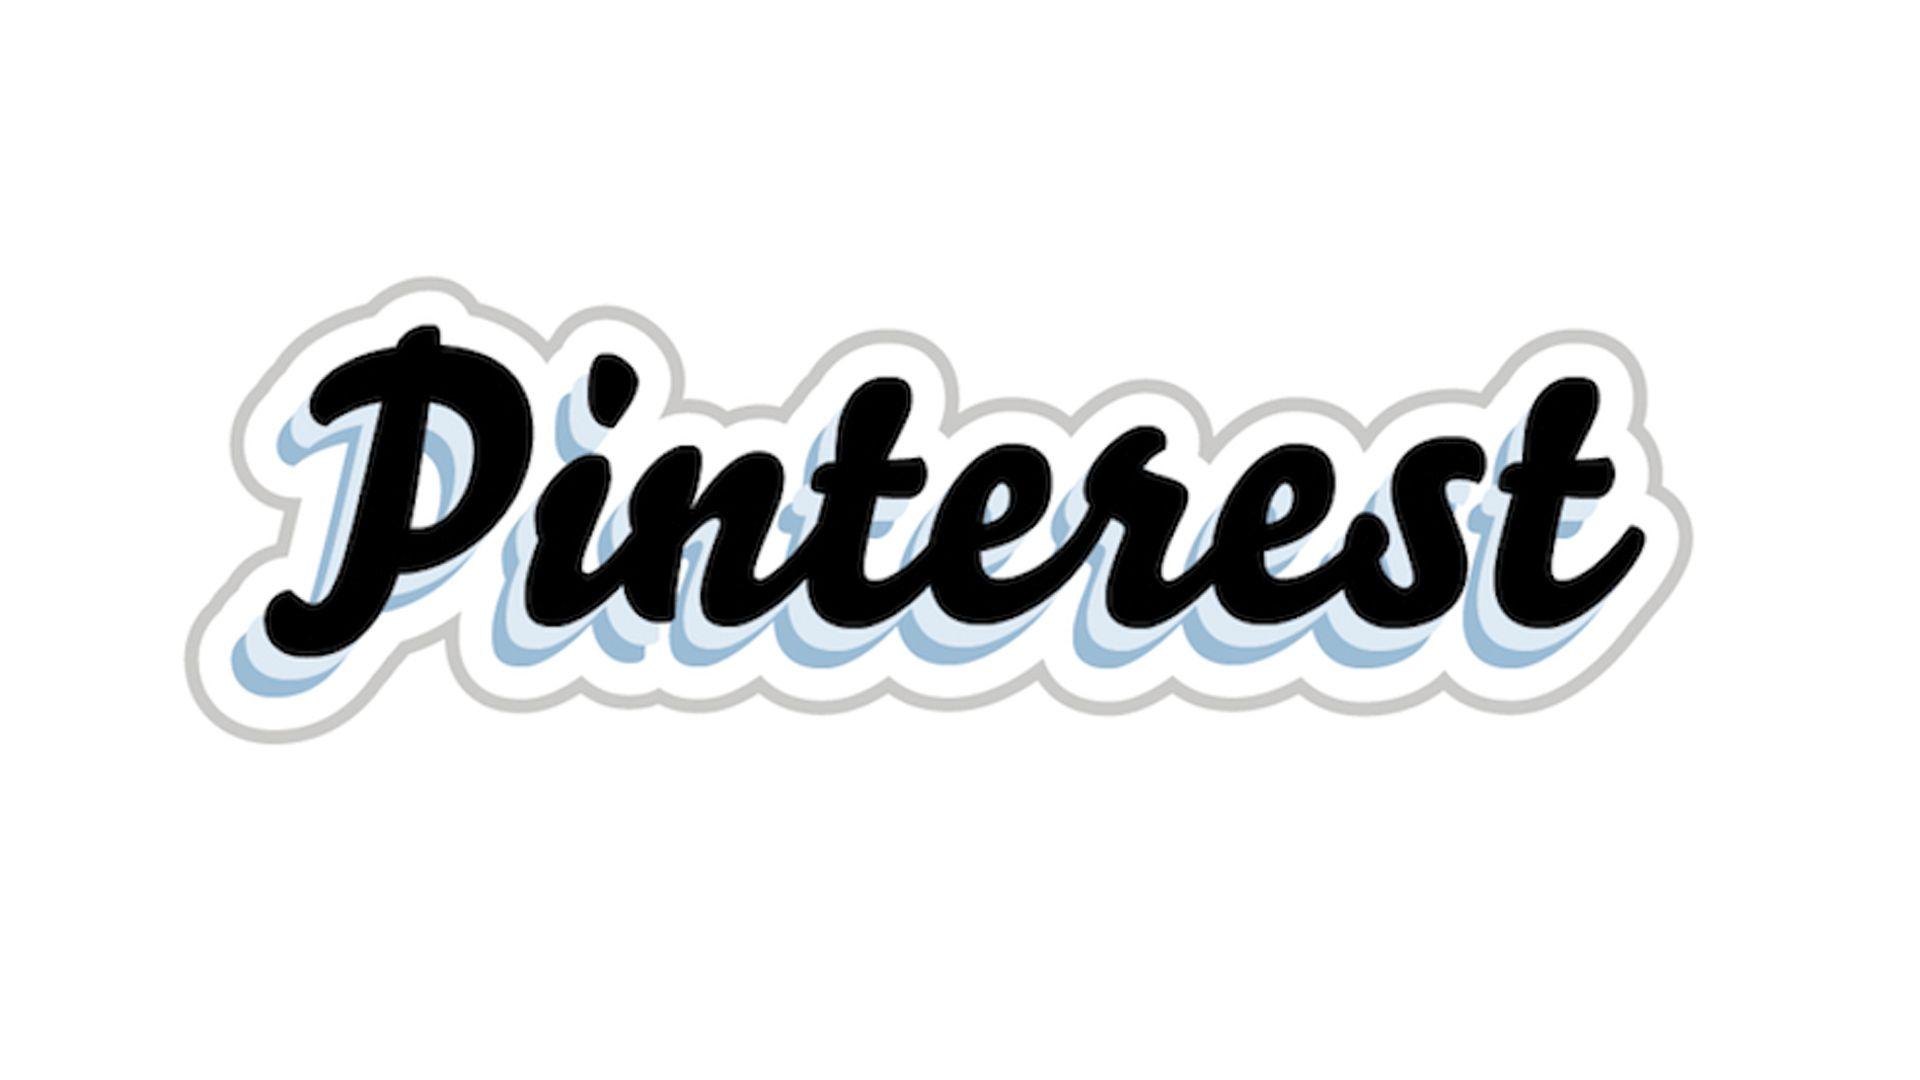 Pinterset Logo - Meaning Pinterest logo and symbol | history and evolution